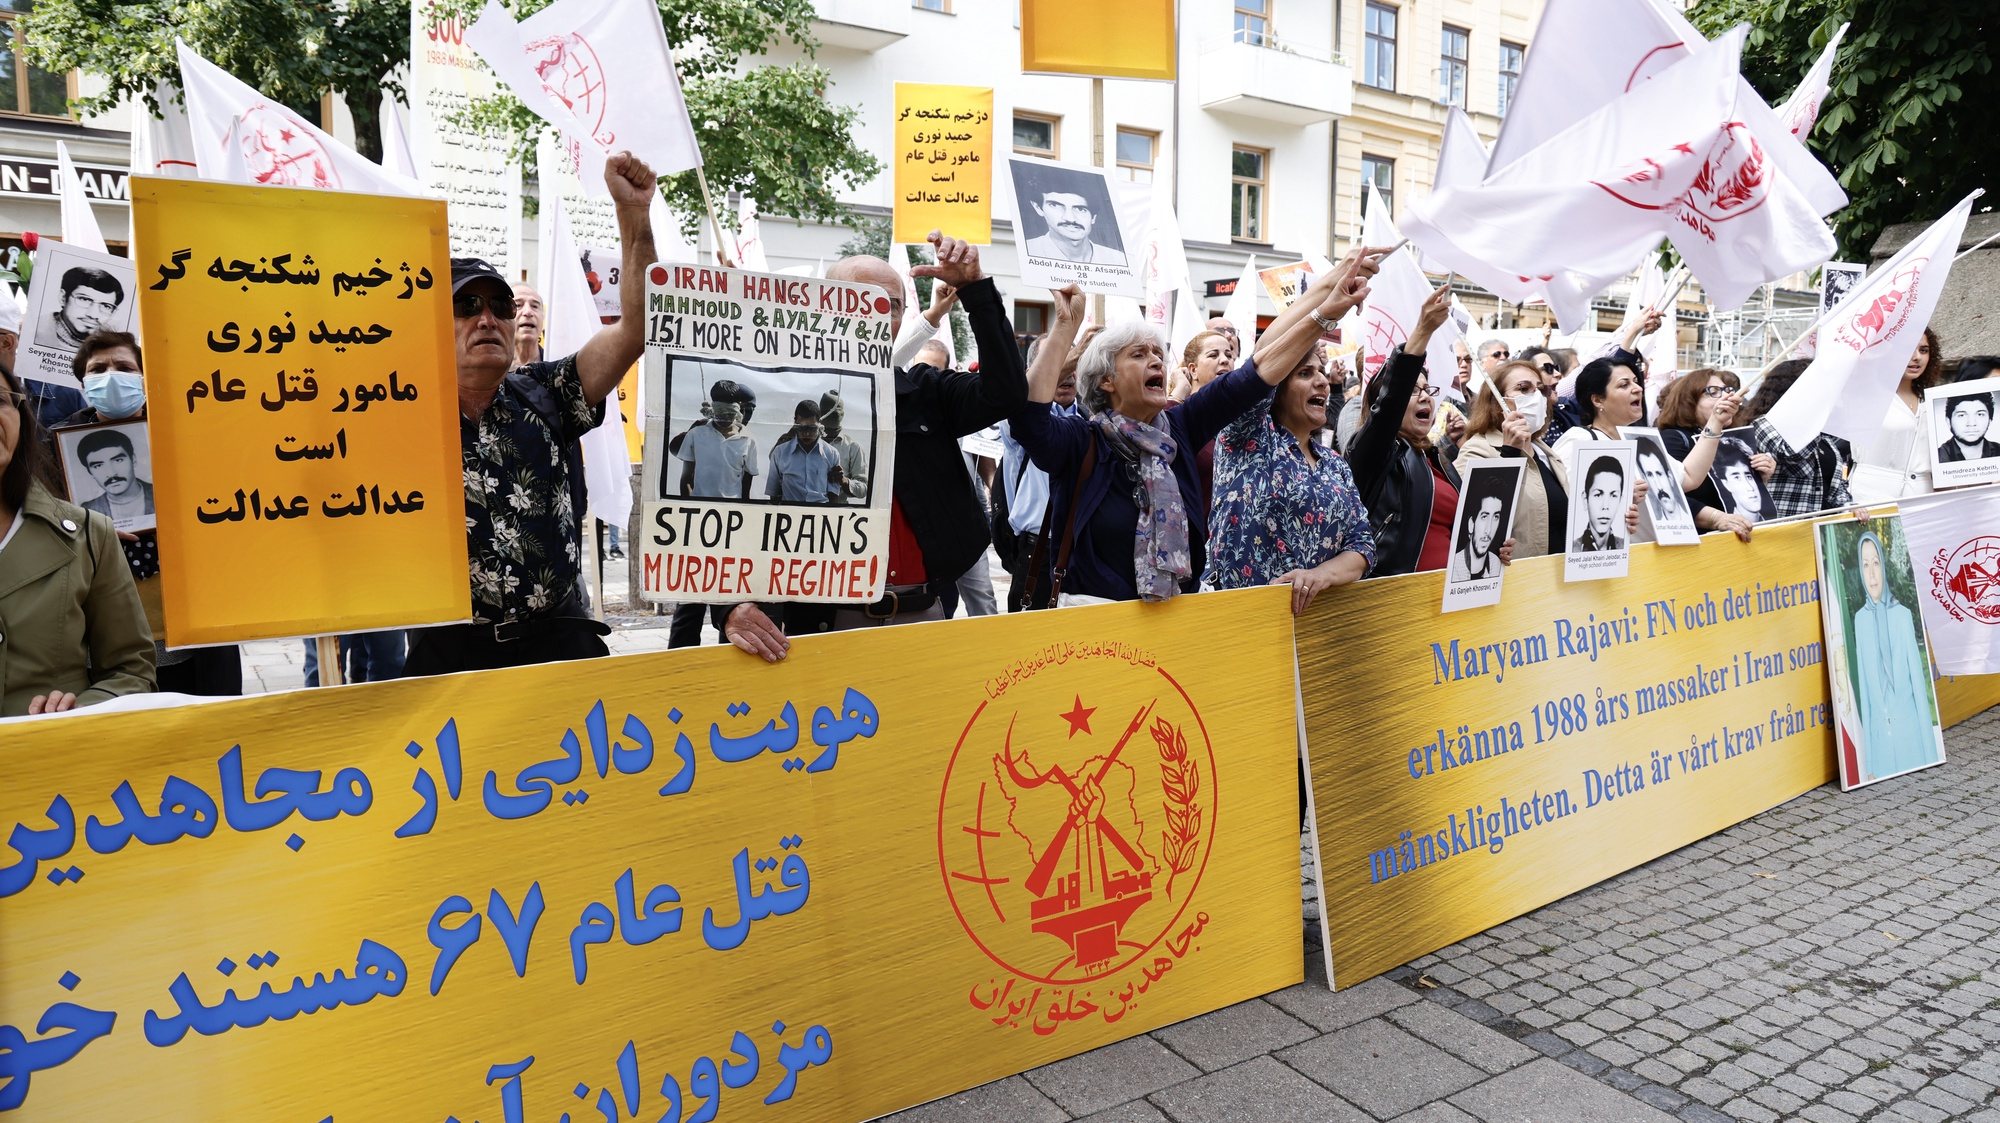 epa09407908 Supporters of the People&#039;s Mojahedin Organization of Iran protestoutside Stockholm distric court as the trial of Hamid Noury starts in Stockholm, Sweden, 10 August 2021. This is the first day of the trial of Hamid Noury who is accused of involvement in the massacre of political prisoners in Iran in 1988.  EPA/STEFAN JERREVANG SWEDEN OUT